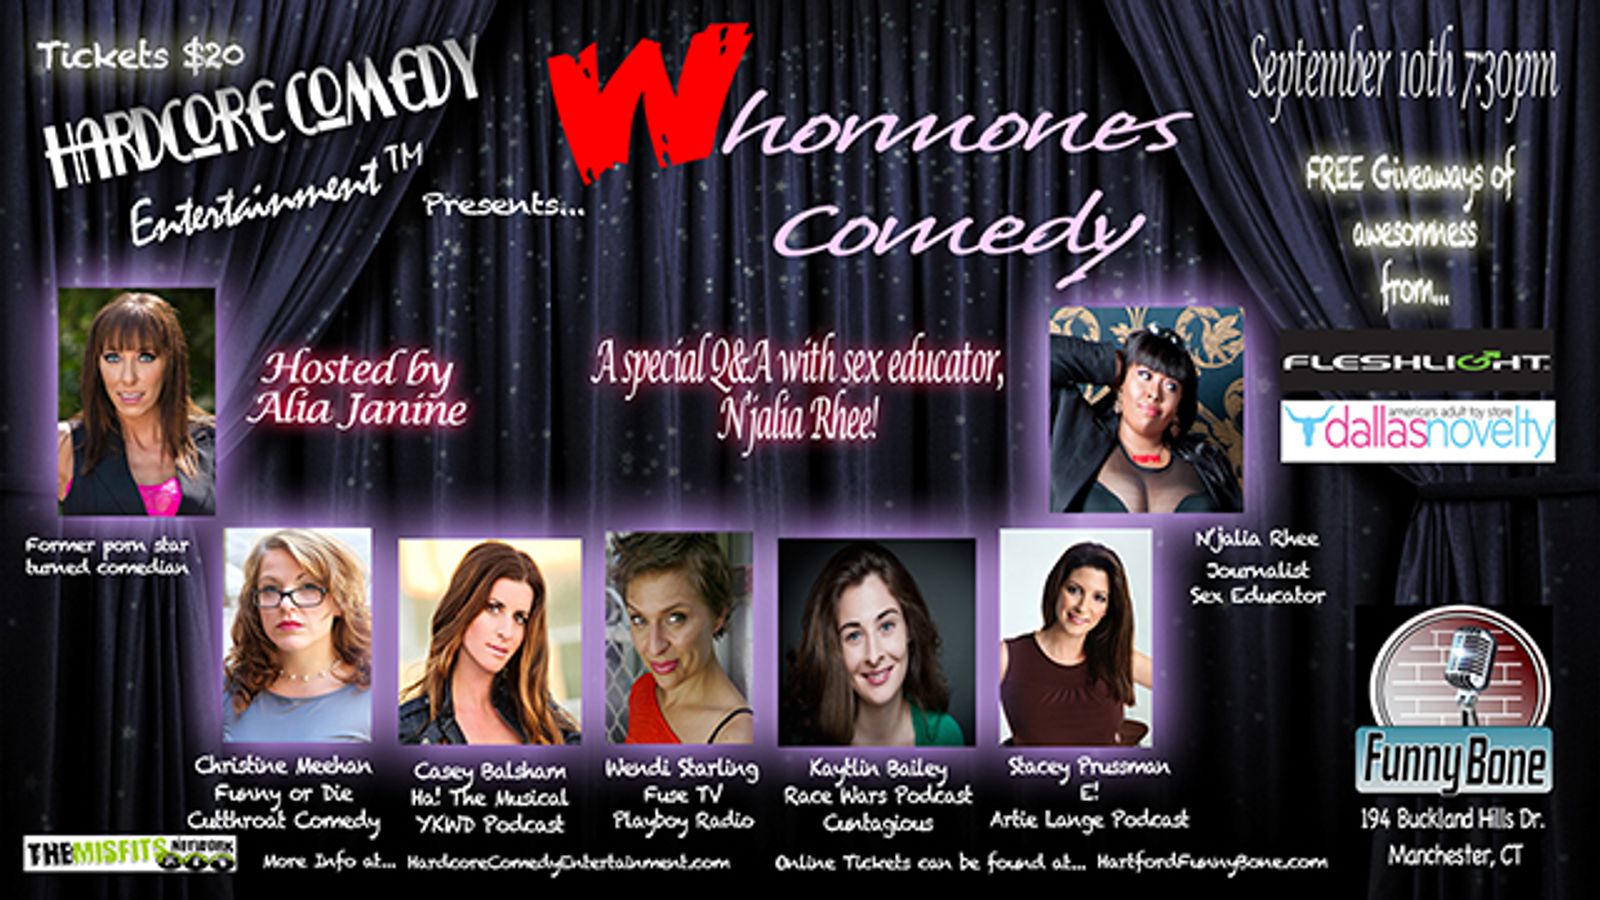 Whormones Comedy to Premiere at Funny Bone in Manchester, CT